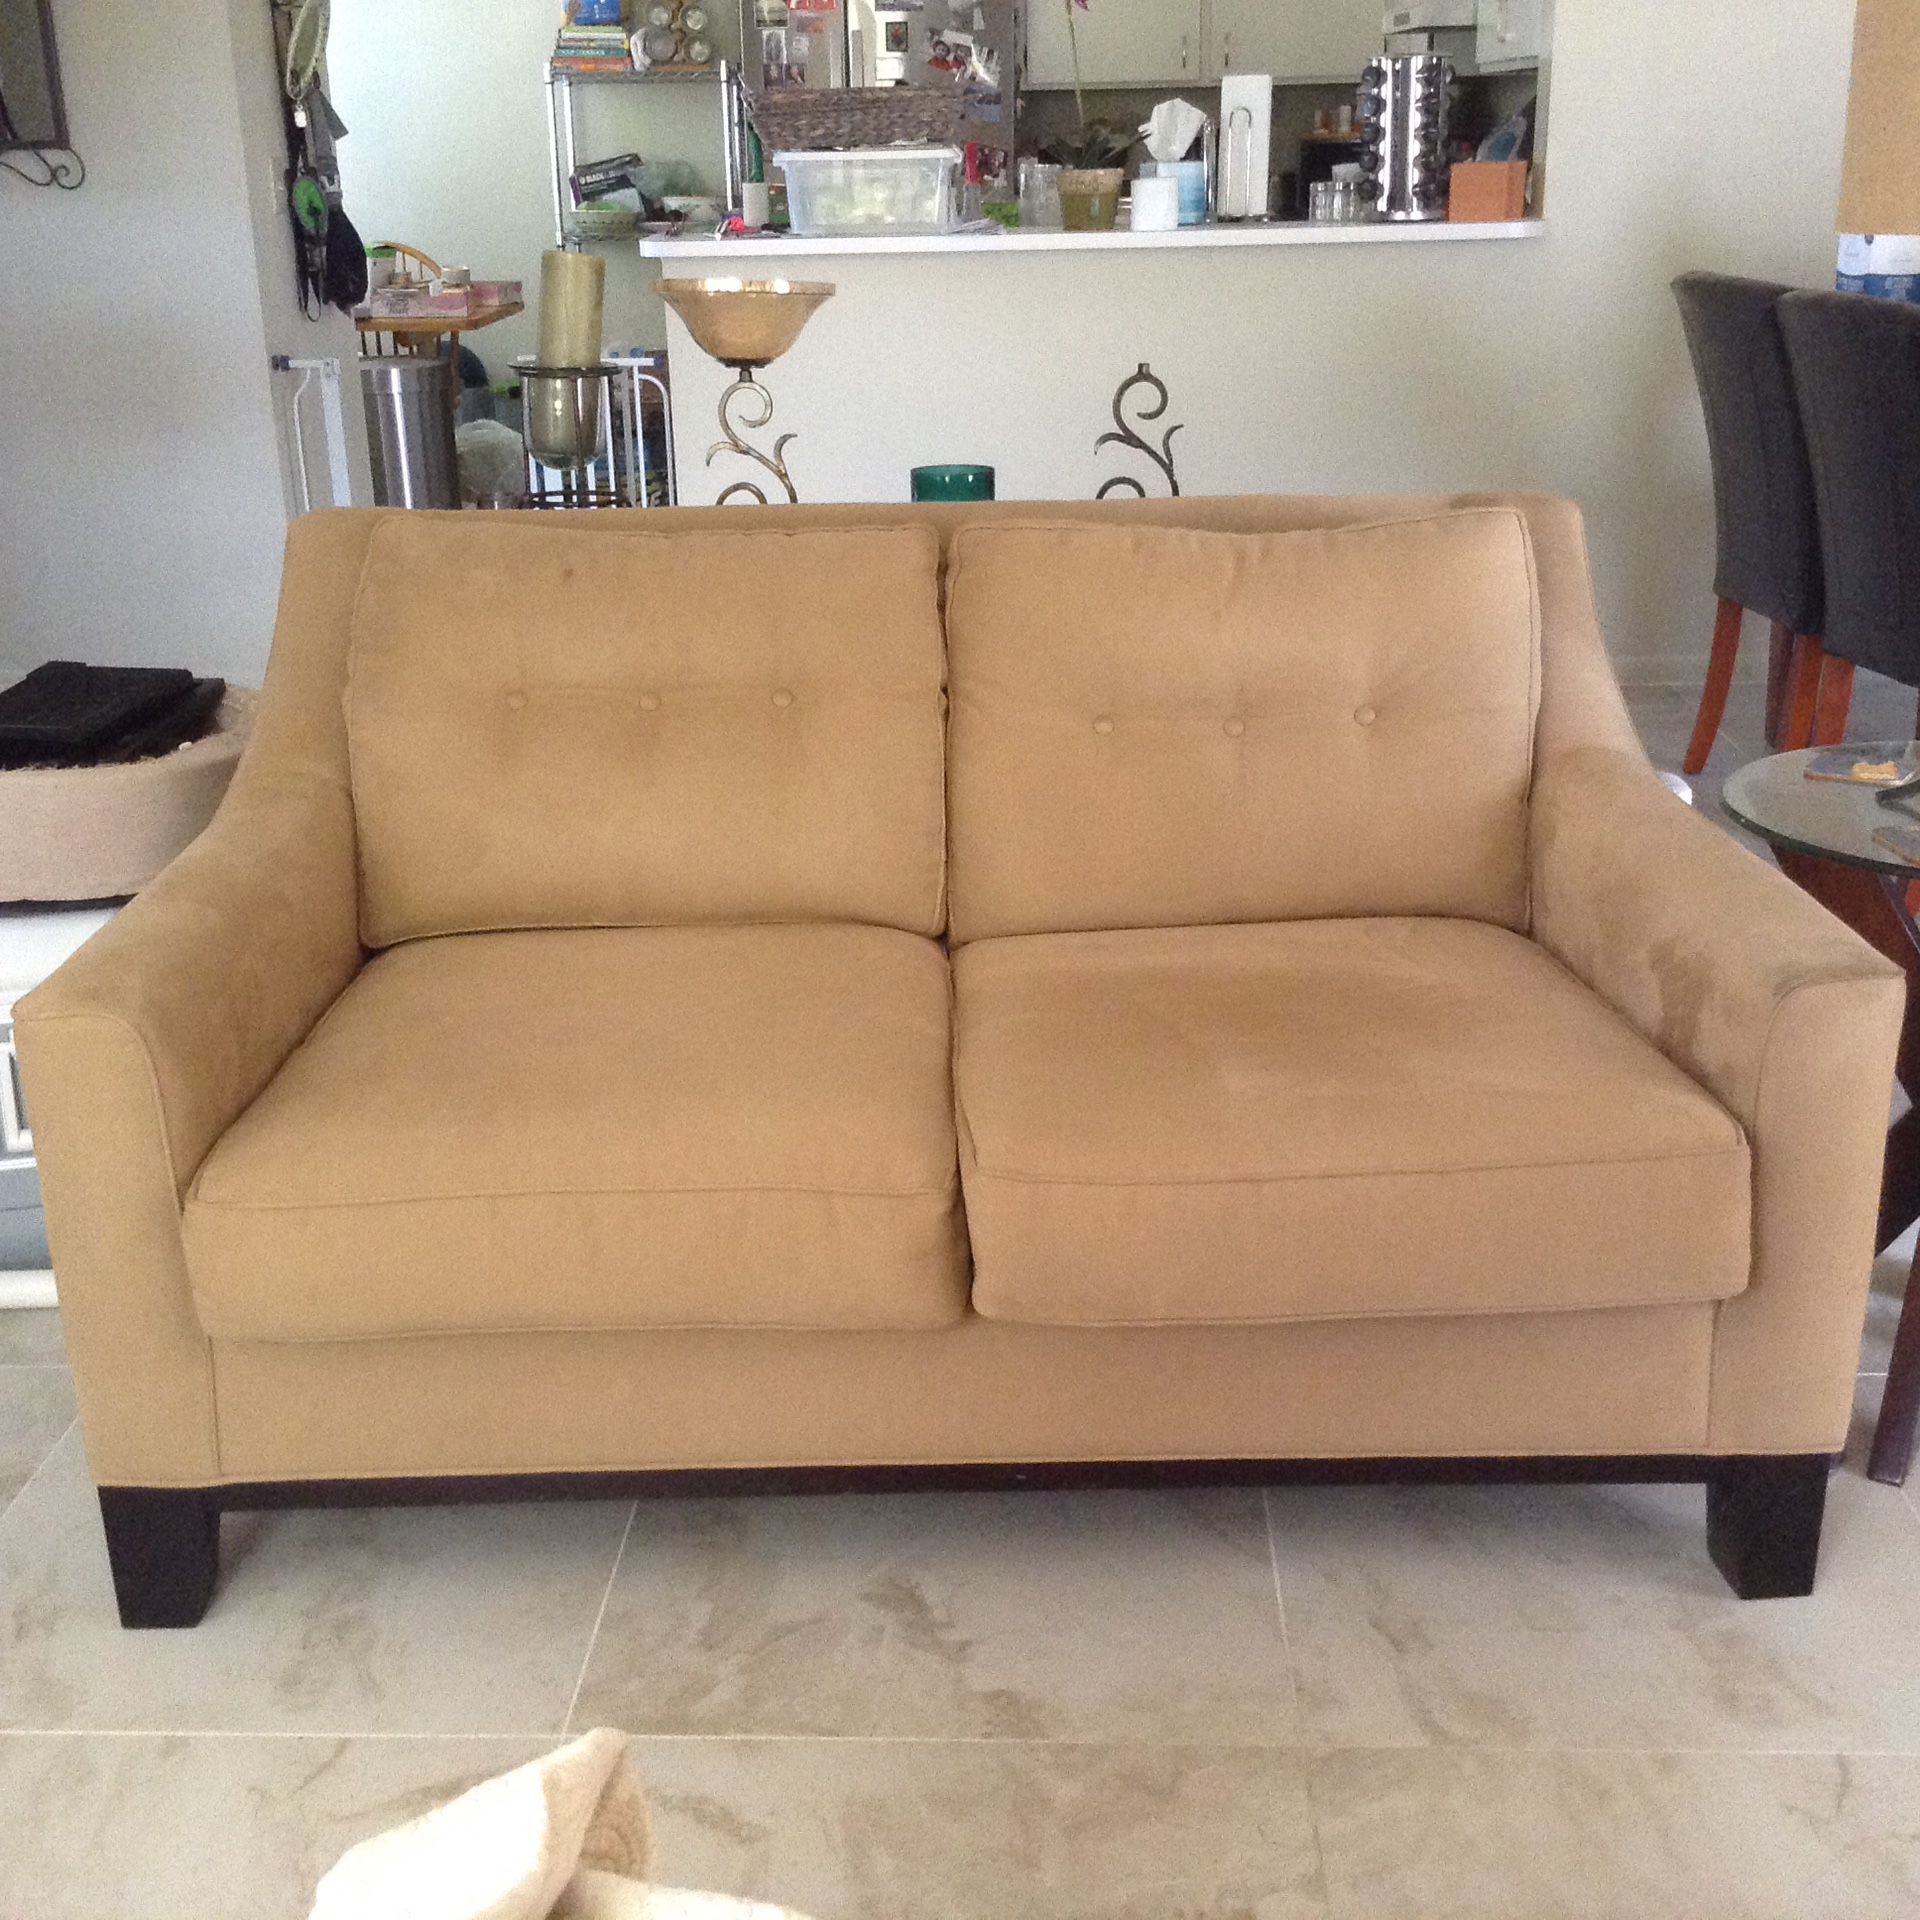 Like NEW Microfiber Plush Loveseat in Excellent condition! Kept covered since purchase date. Matching swivel chair also for sale!